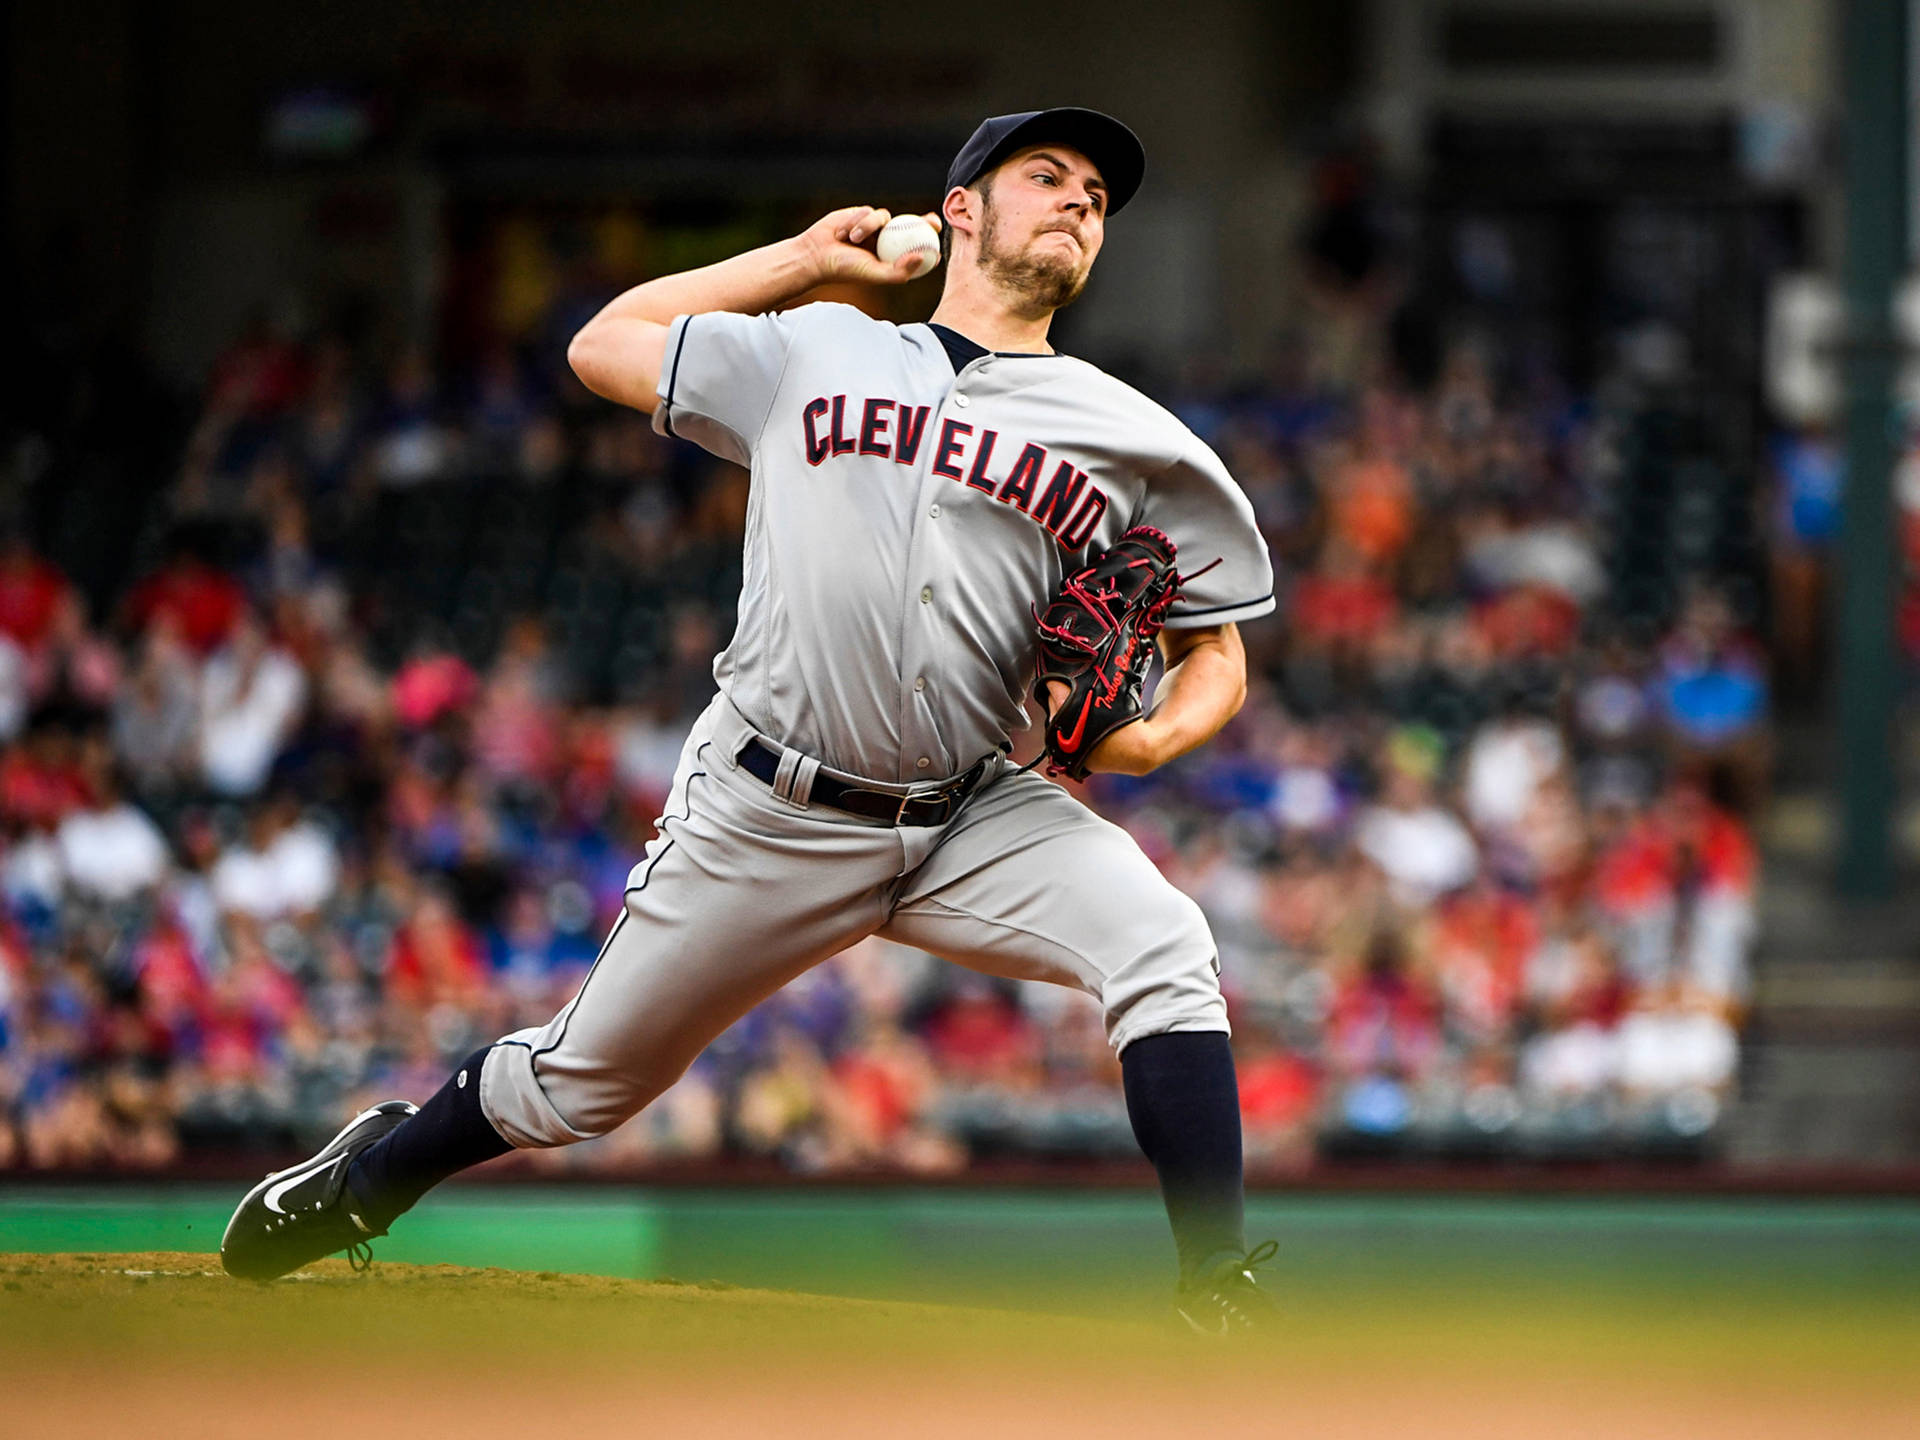 Trevor Bauer Pitching With Cleveland On Shirt Background